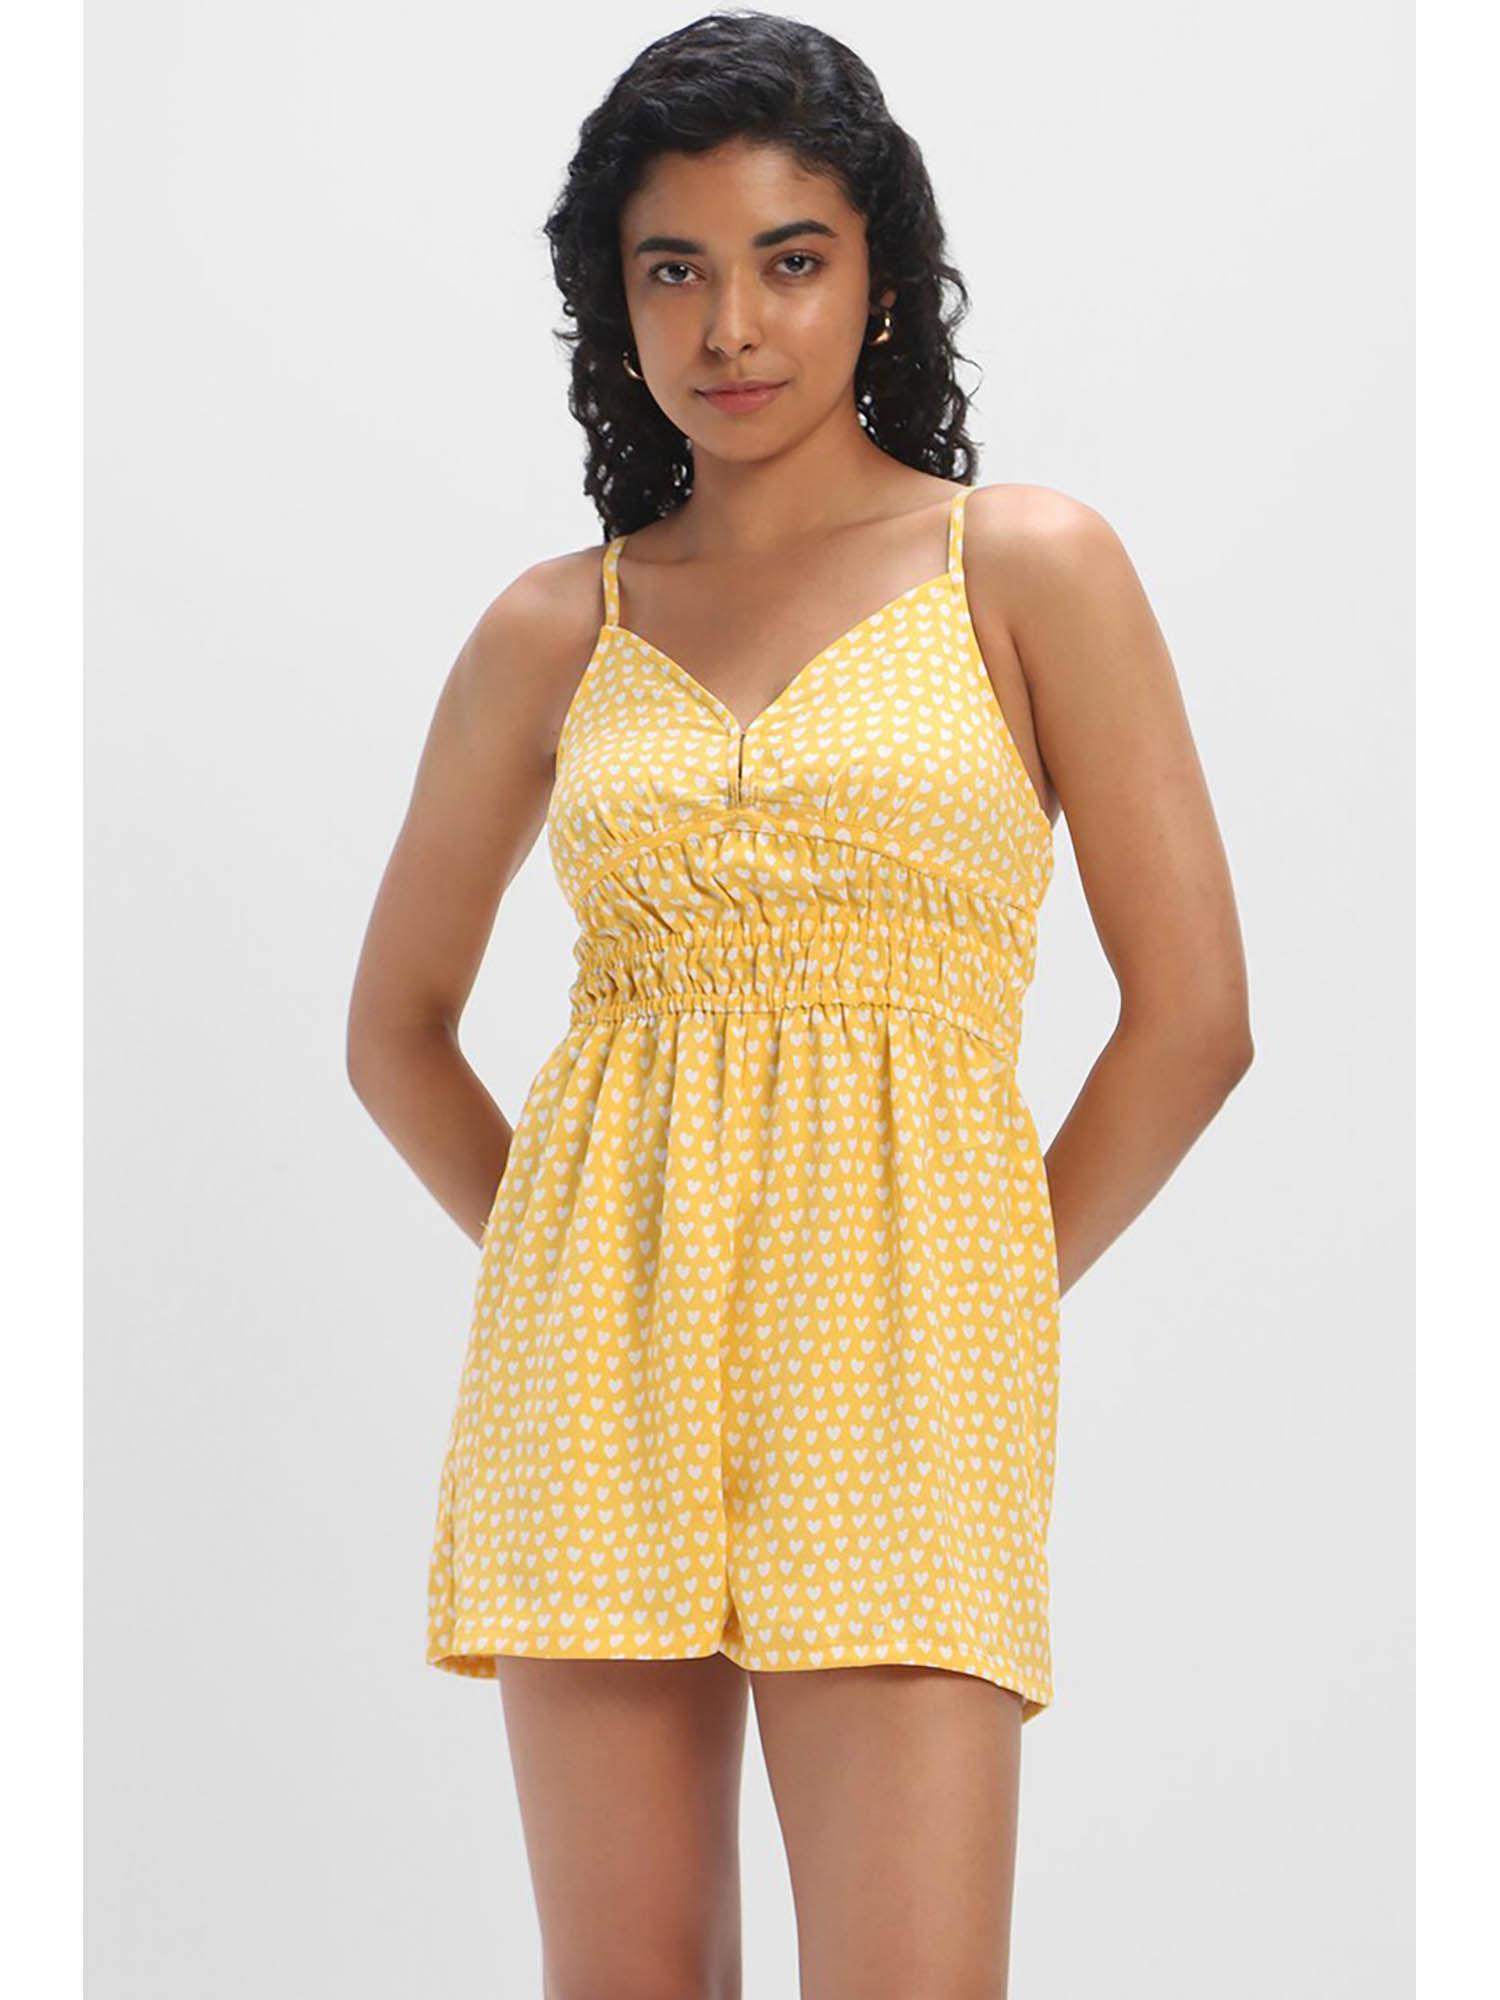 printed yellow rompers